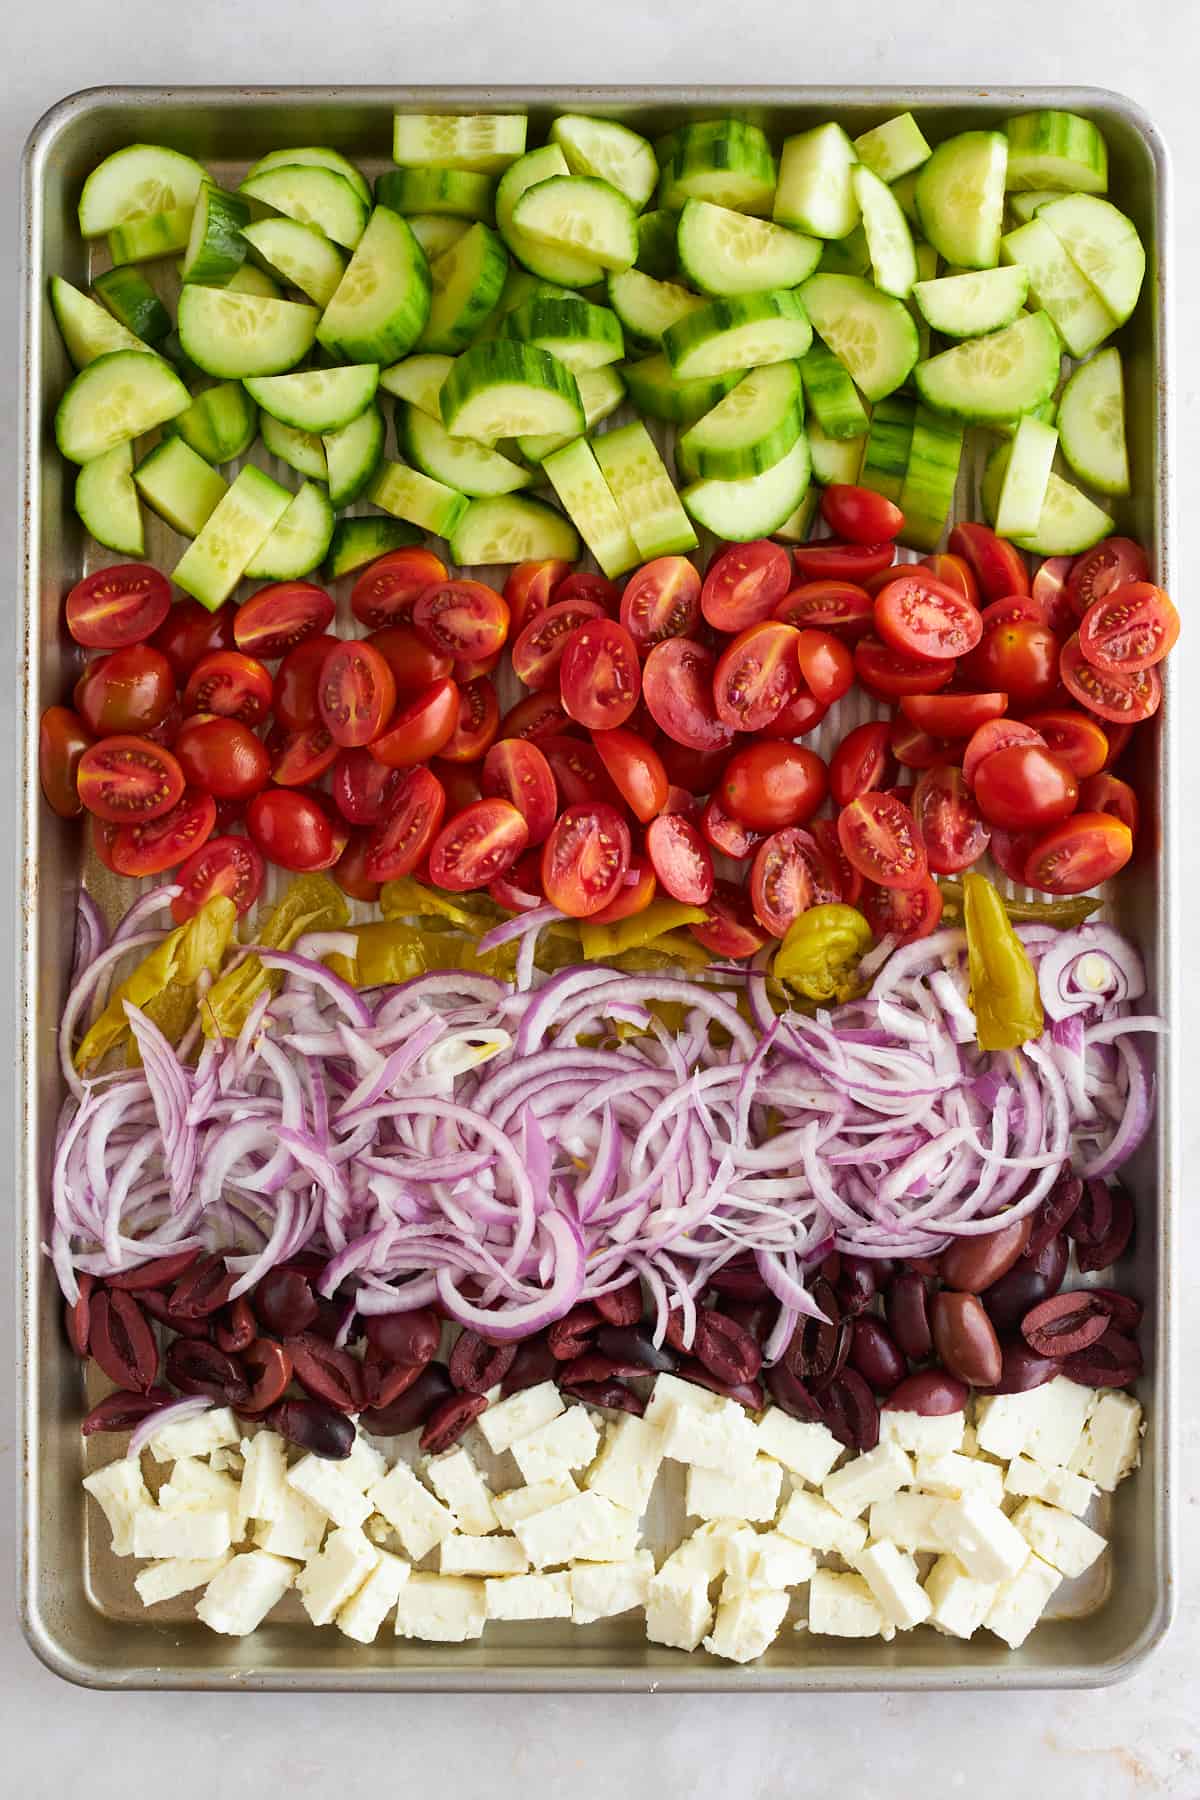 Cucumbers, tomatoes, pepperoncini peppers, red onions, and olives on a baking sheet. 